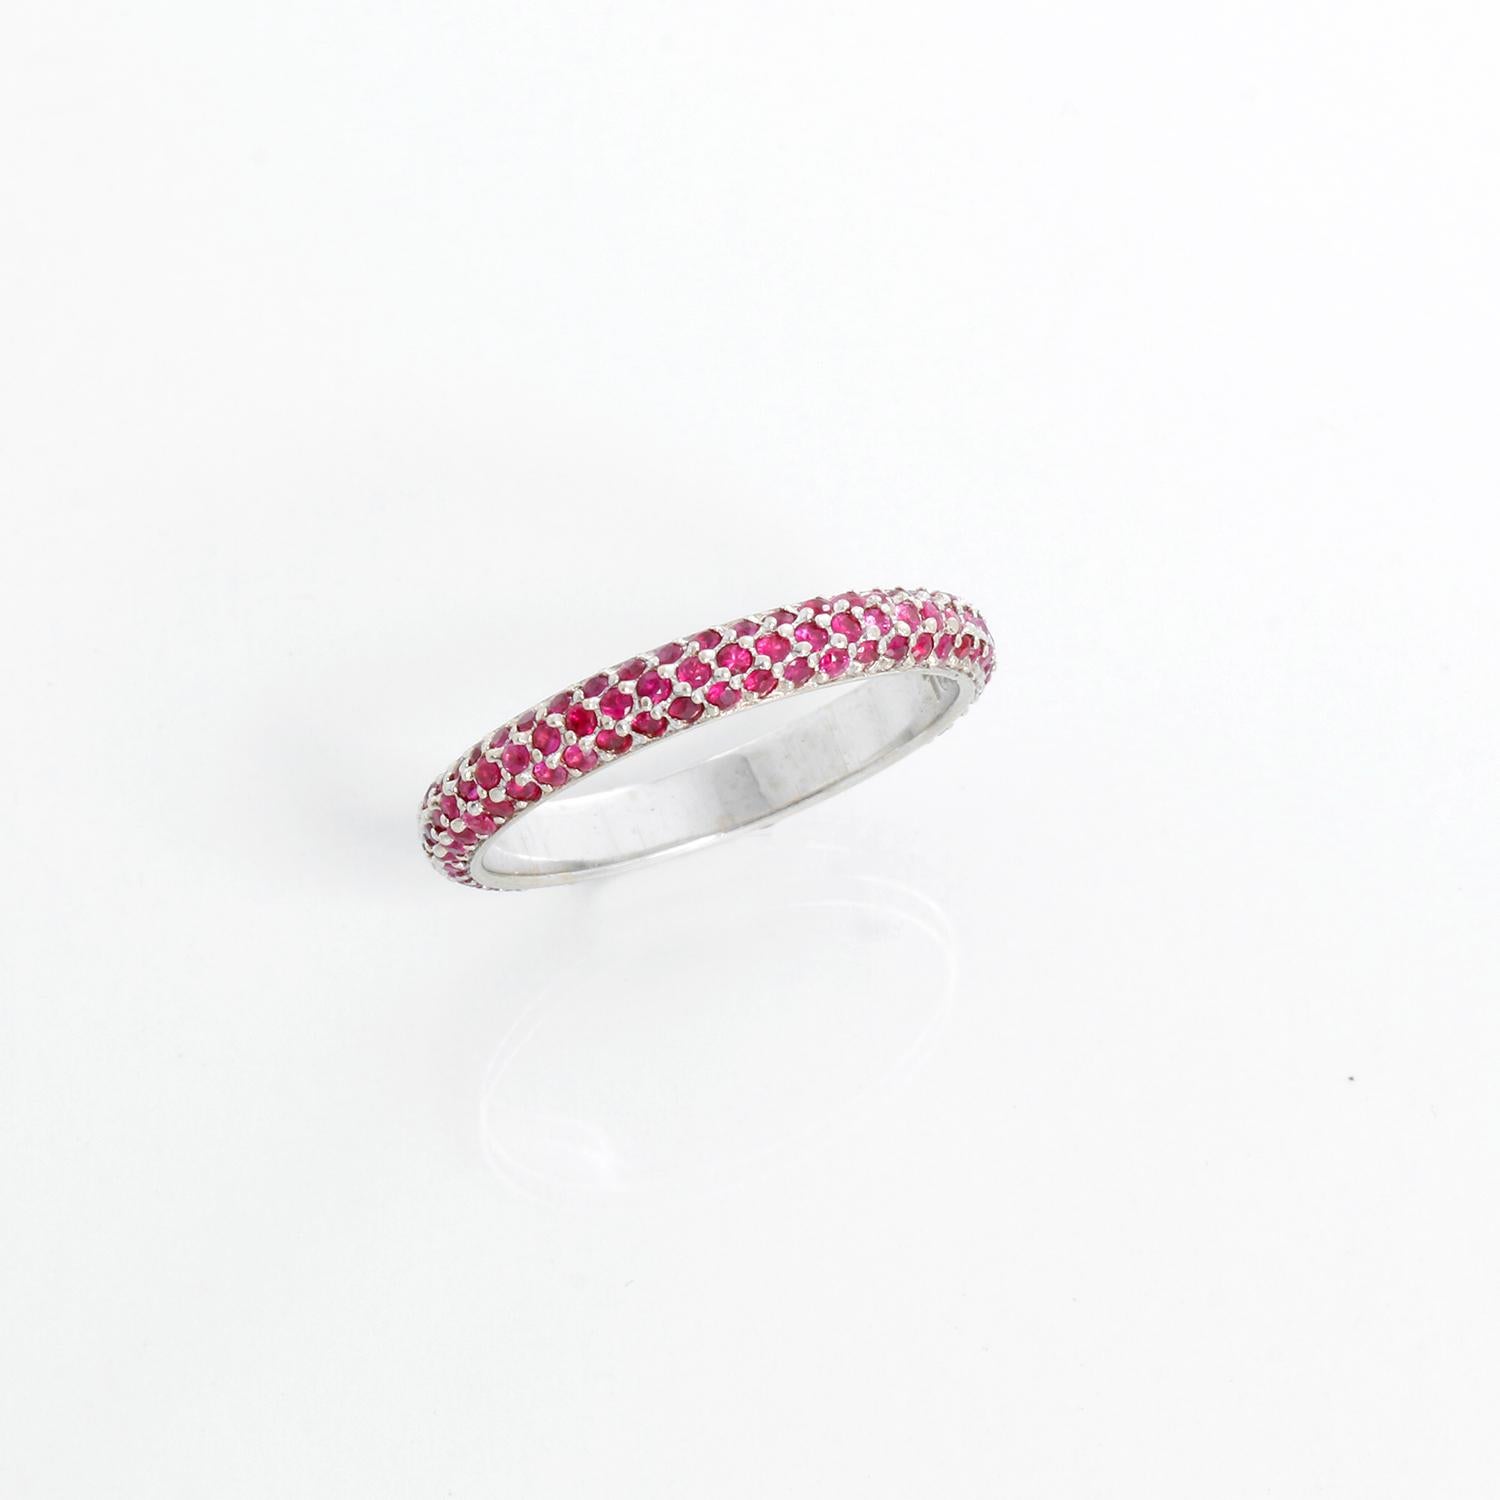 14K White Gold Pave Ruby Band Size 7  - Three row or pave set rubies. Size 7. Cannot be resized. Hallmarked 18K.